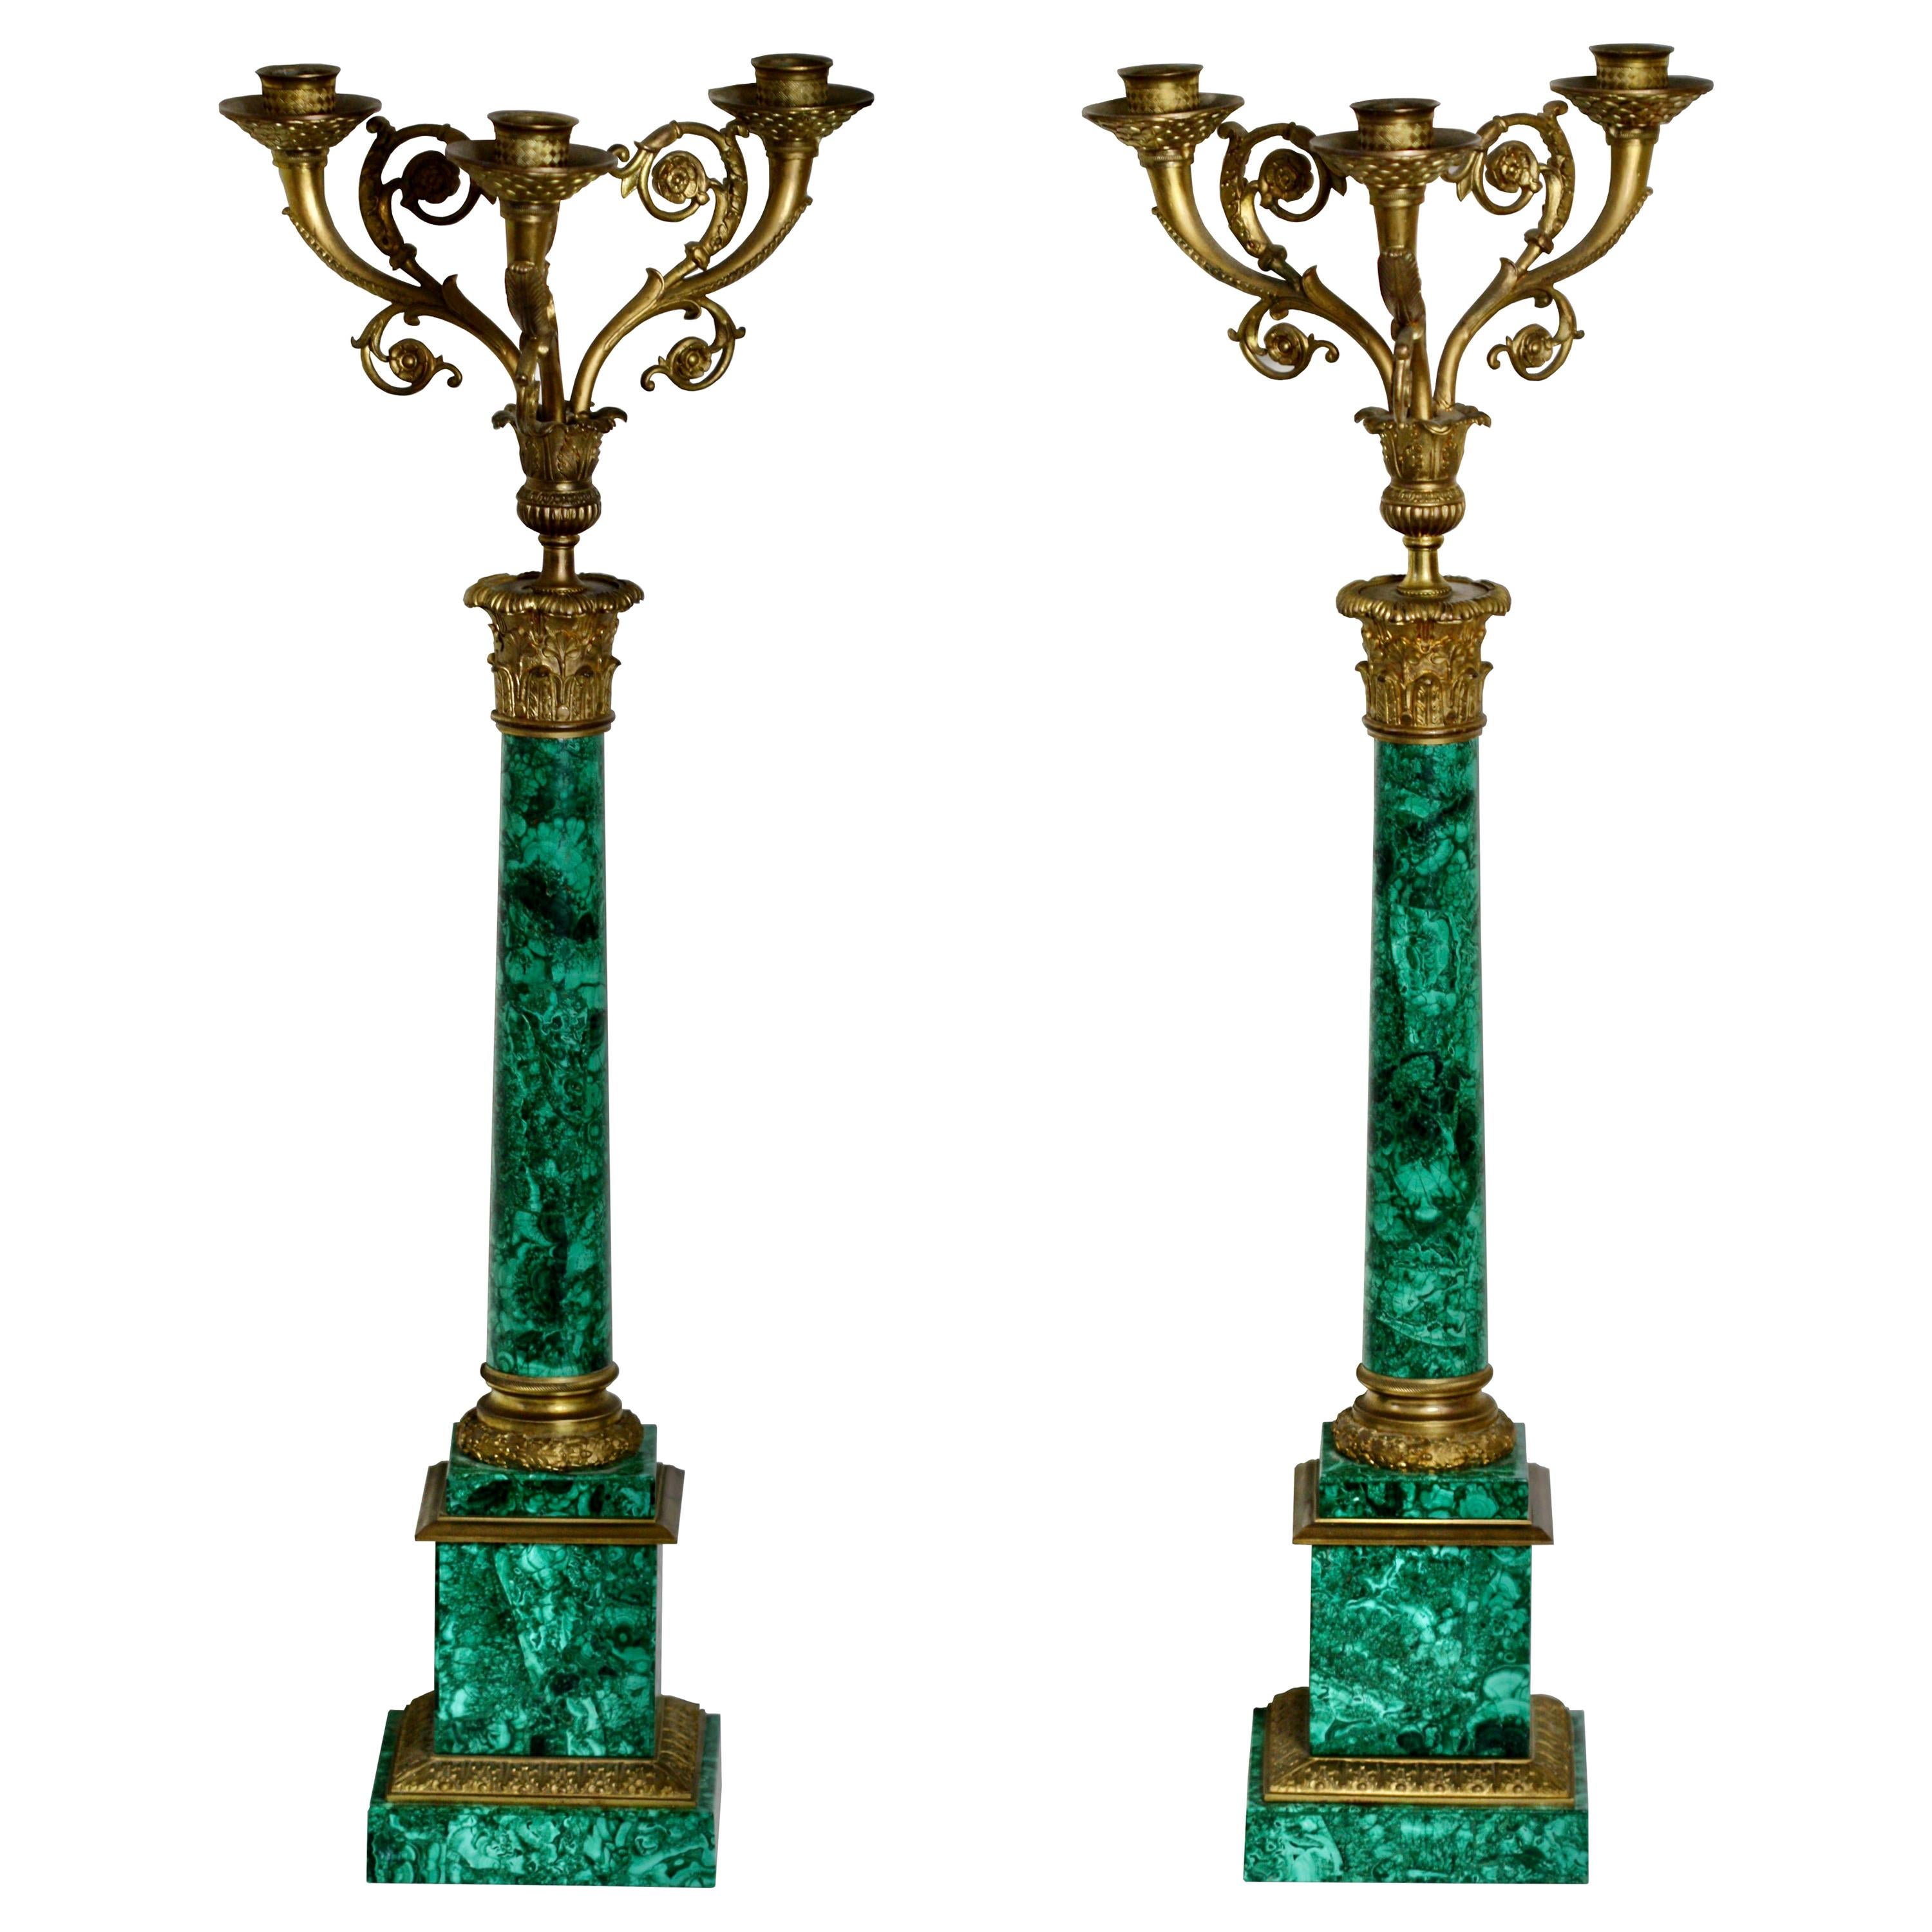 Pair of Russian Style Gilt-Bronze Mounted Malachite Three-Light Candelabra For Sale